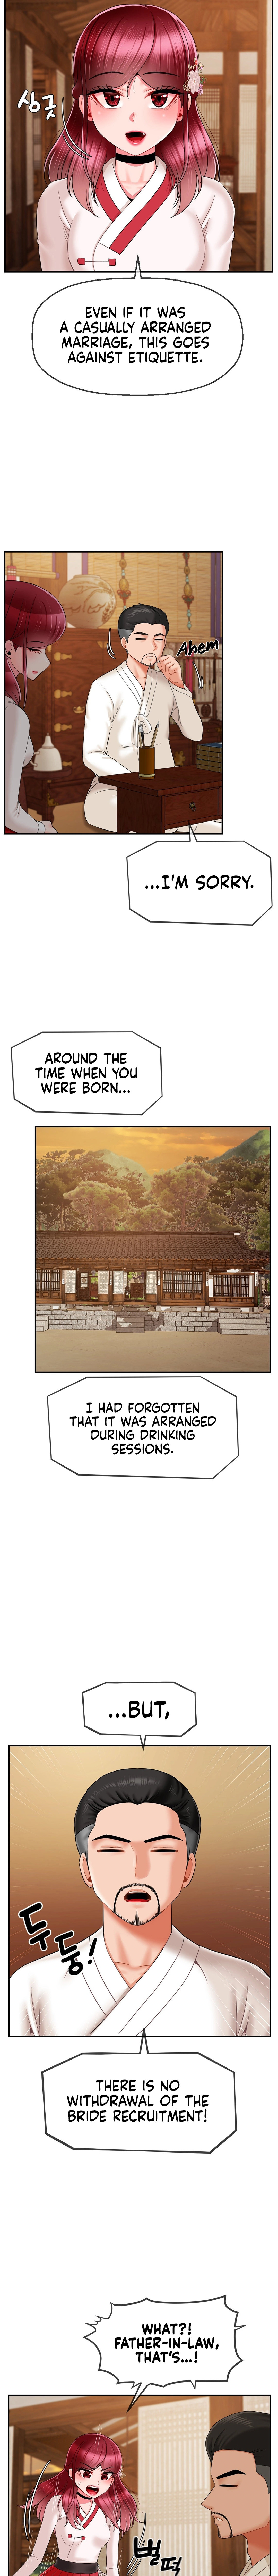 The 17th Son - Chapter 7 Page 5